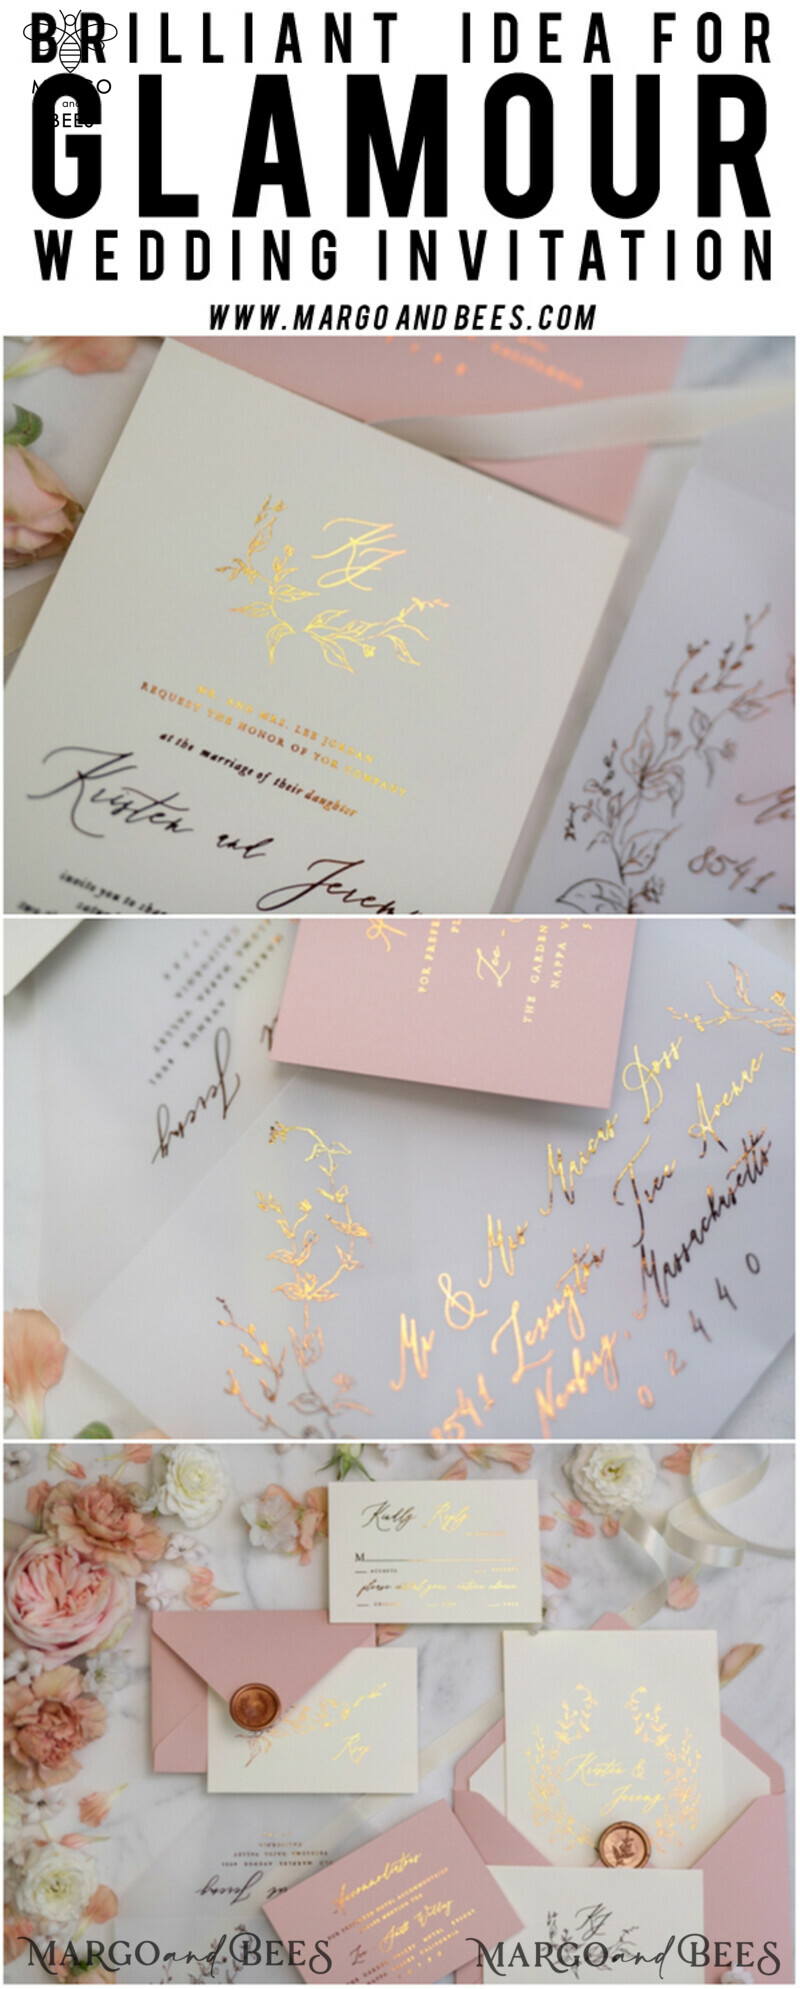 Stunning Blush Pink Wedding Invitations with Glamourous Gold Foil Accents and Elegant Vellum Details: A Bespoke Wedding Invitation Suite-39